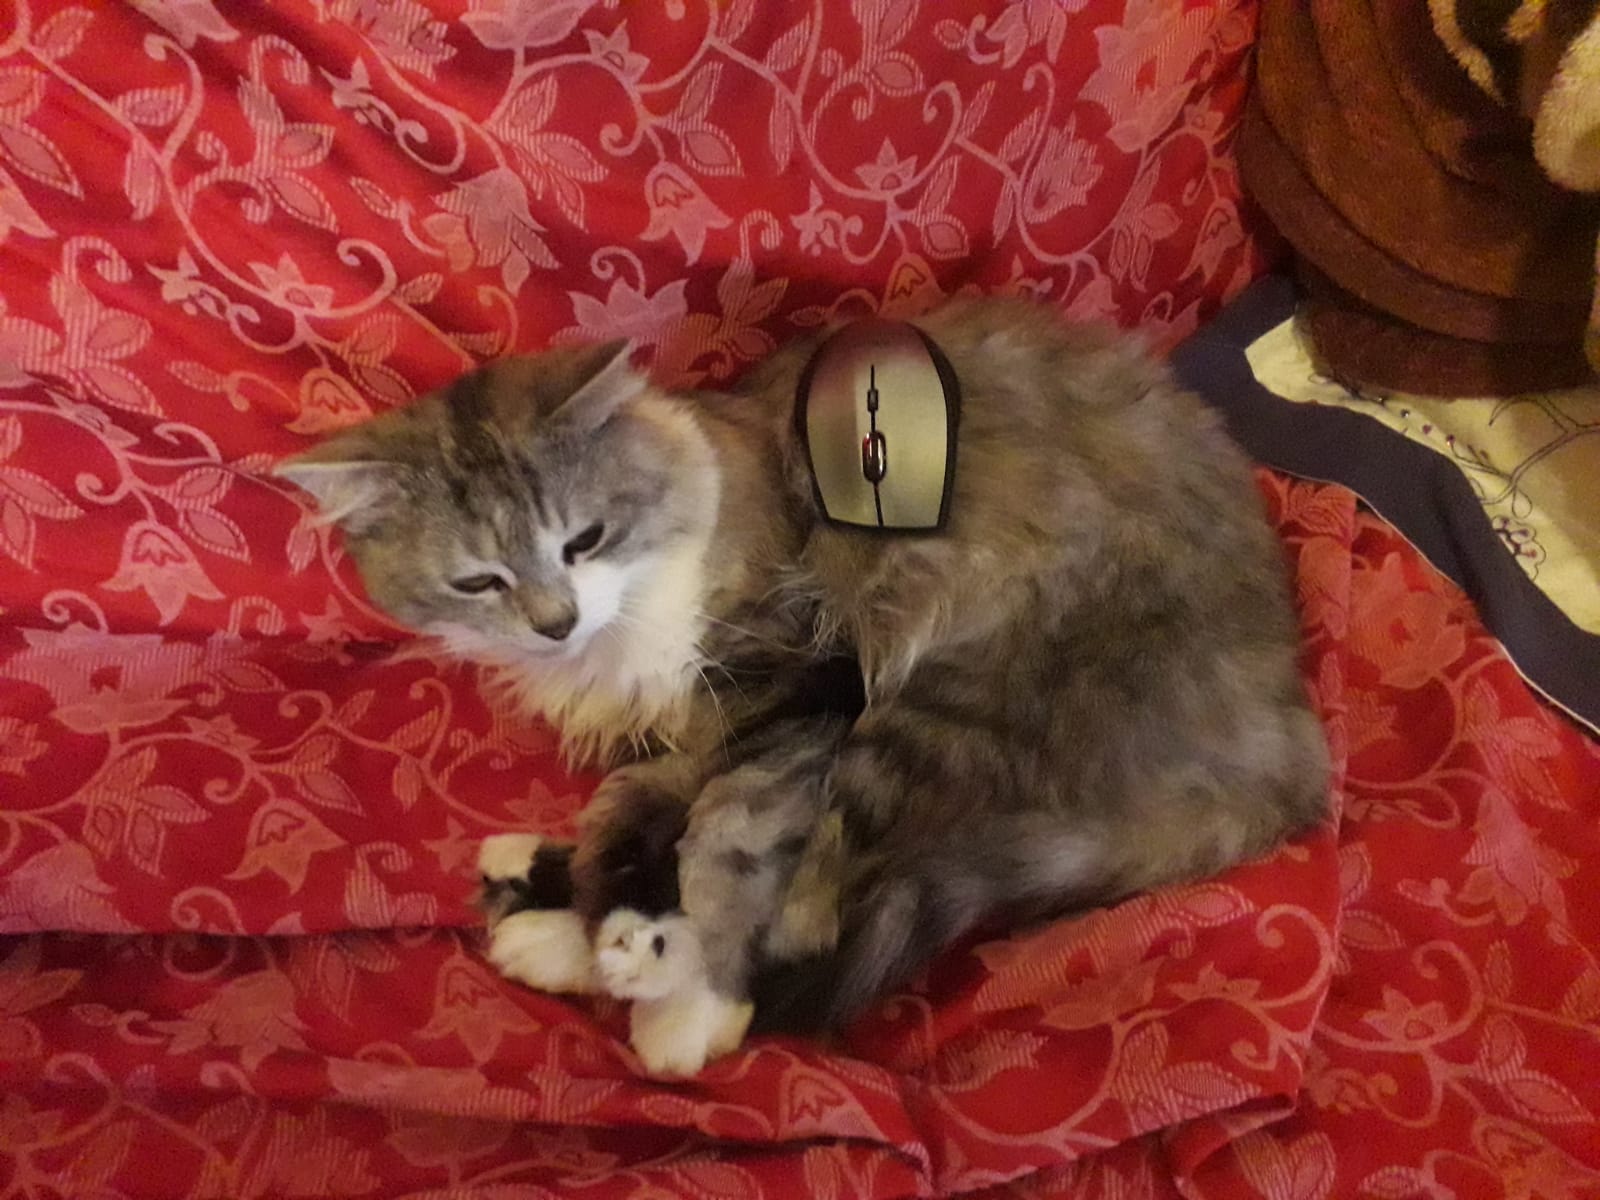 A cat lies with a computer mouse on its back